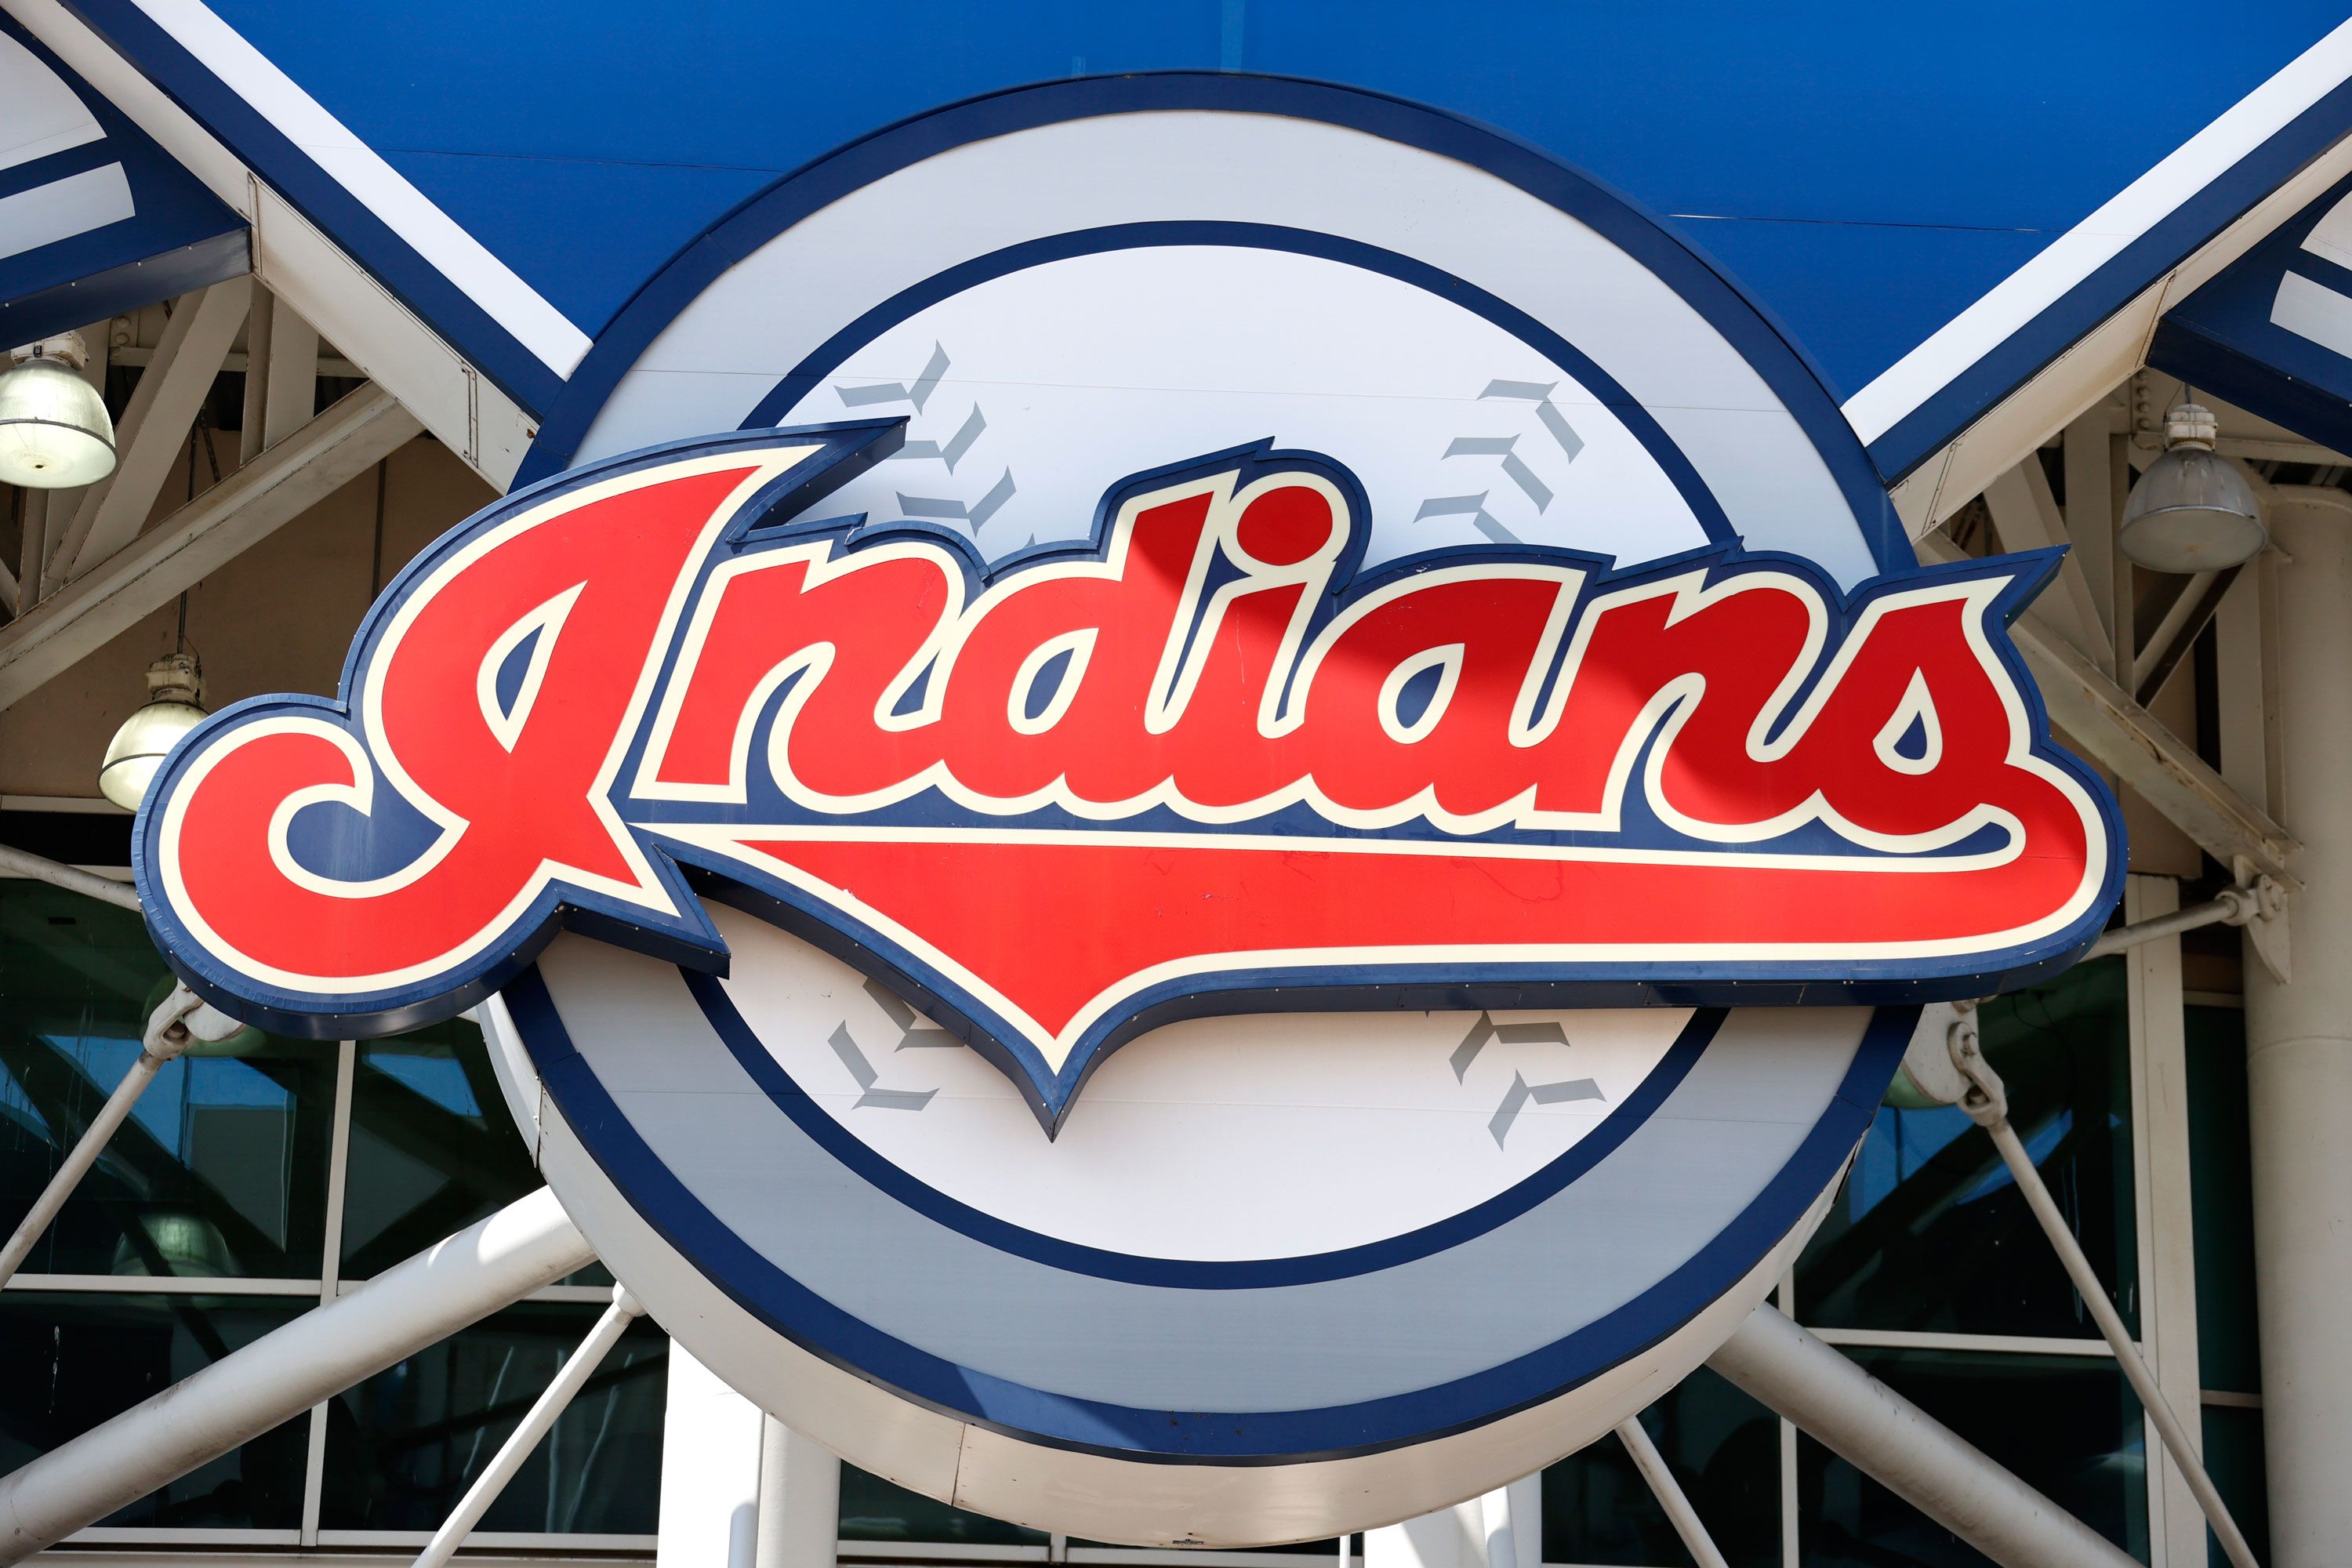 Native Americans protest Chief Wahoo logo at Cleveland Indians